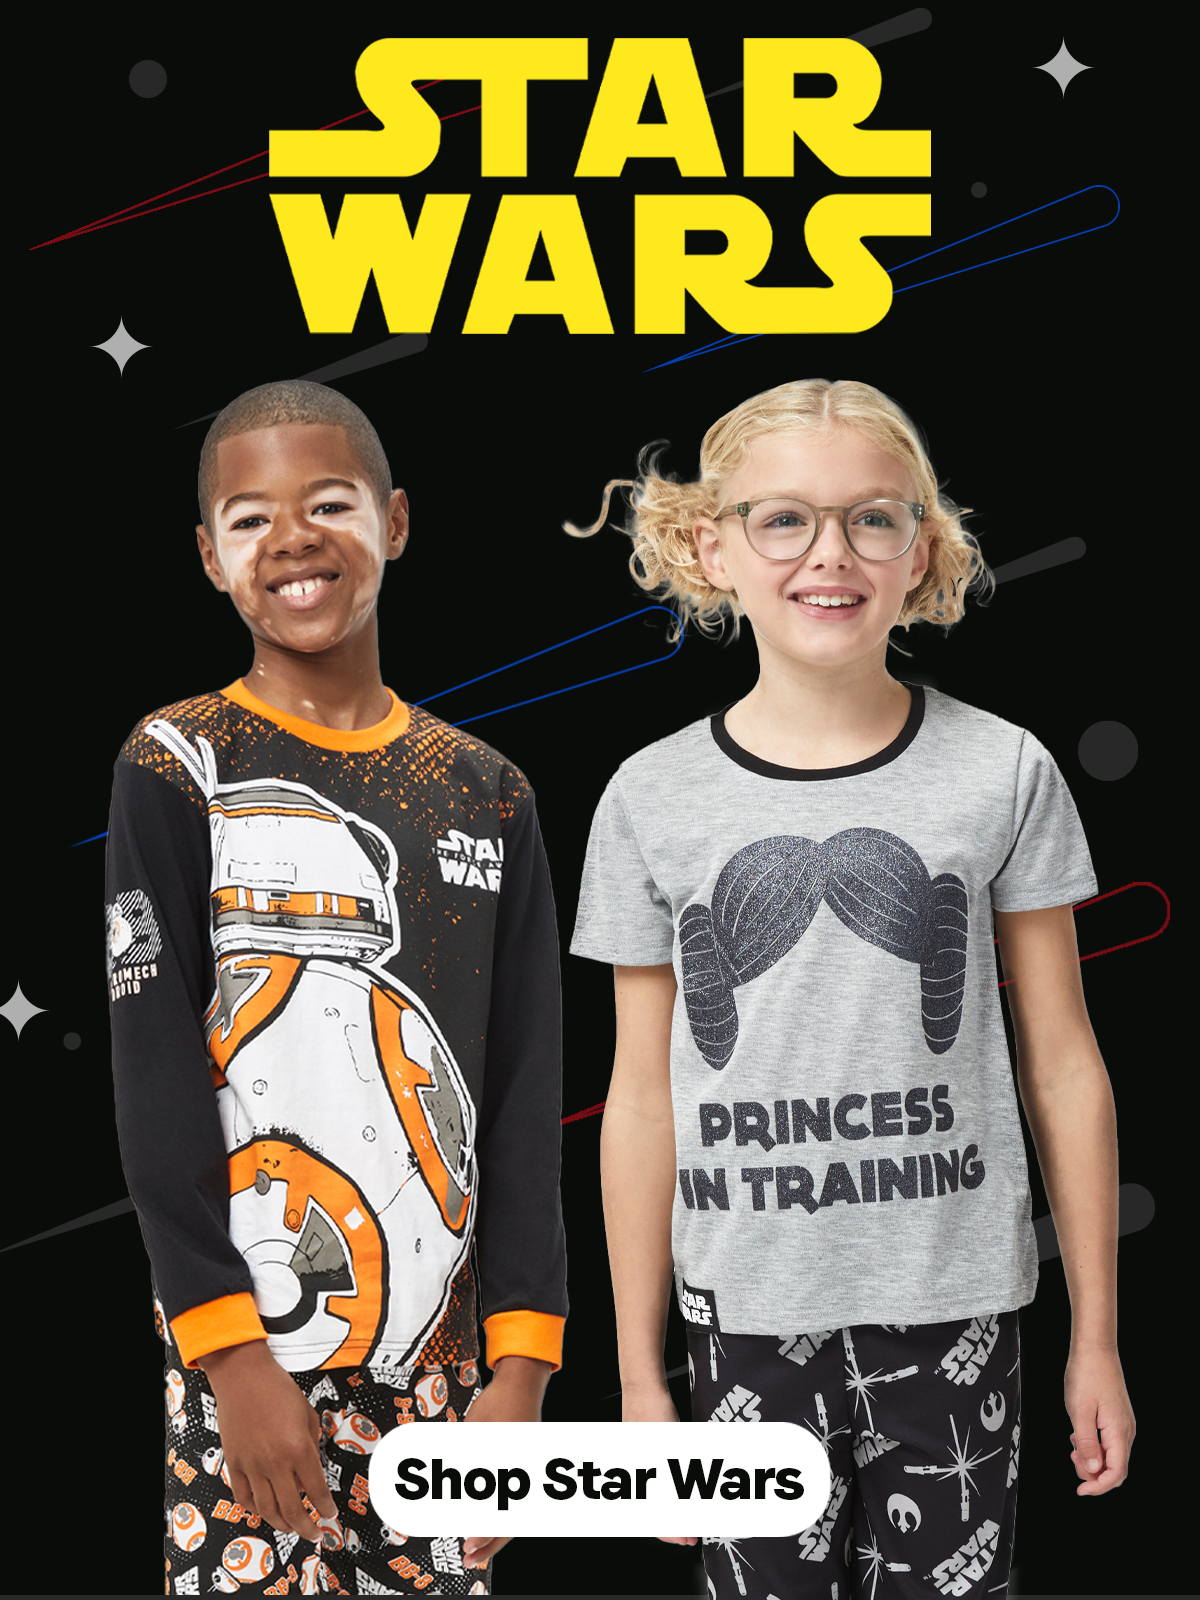 Star Wars - Join the Force! - Shop Star Wars